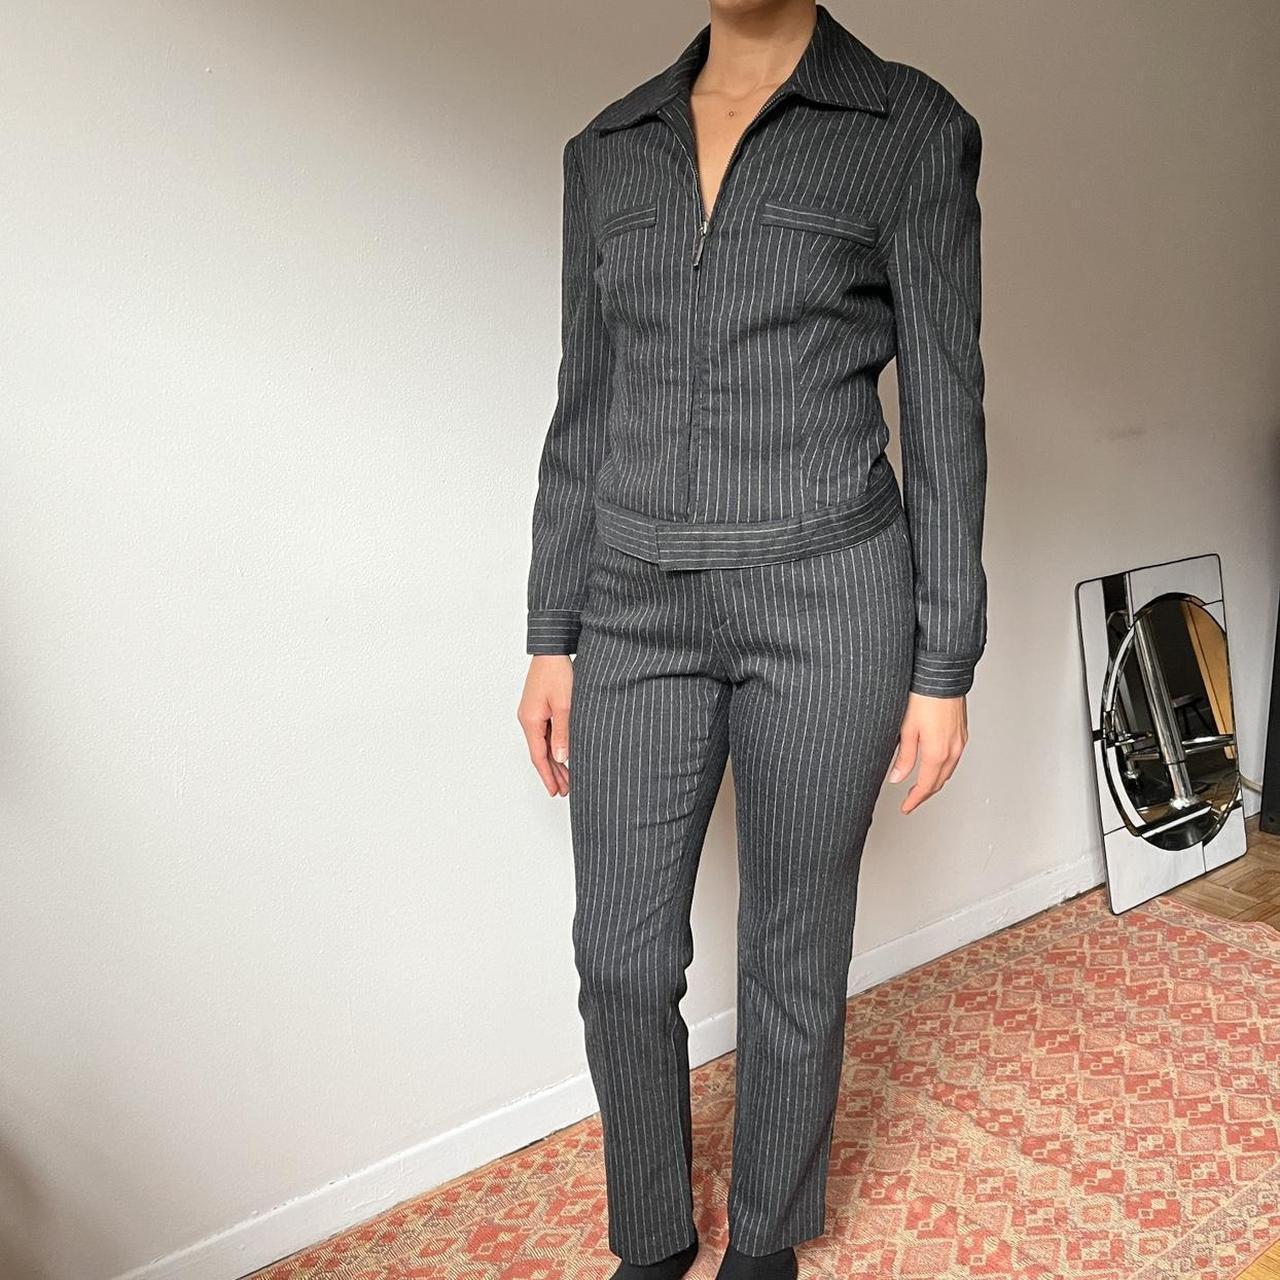 90s MINIMAL Pant Suit. Double-breasted Pant Suit. High-waisted Trousers.  90s Minimal Blazer. Minimal Pencil Skirt. Mens Wear Suit. Size: S -   Canada